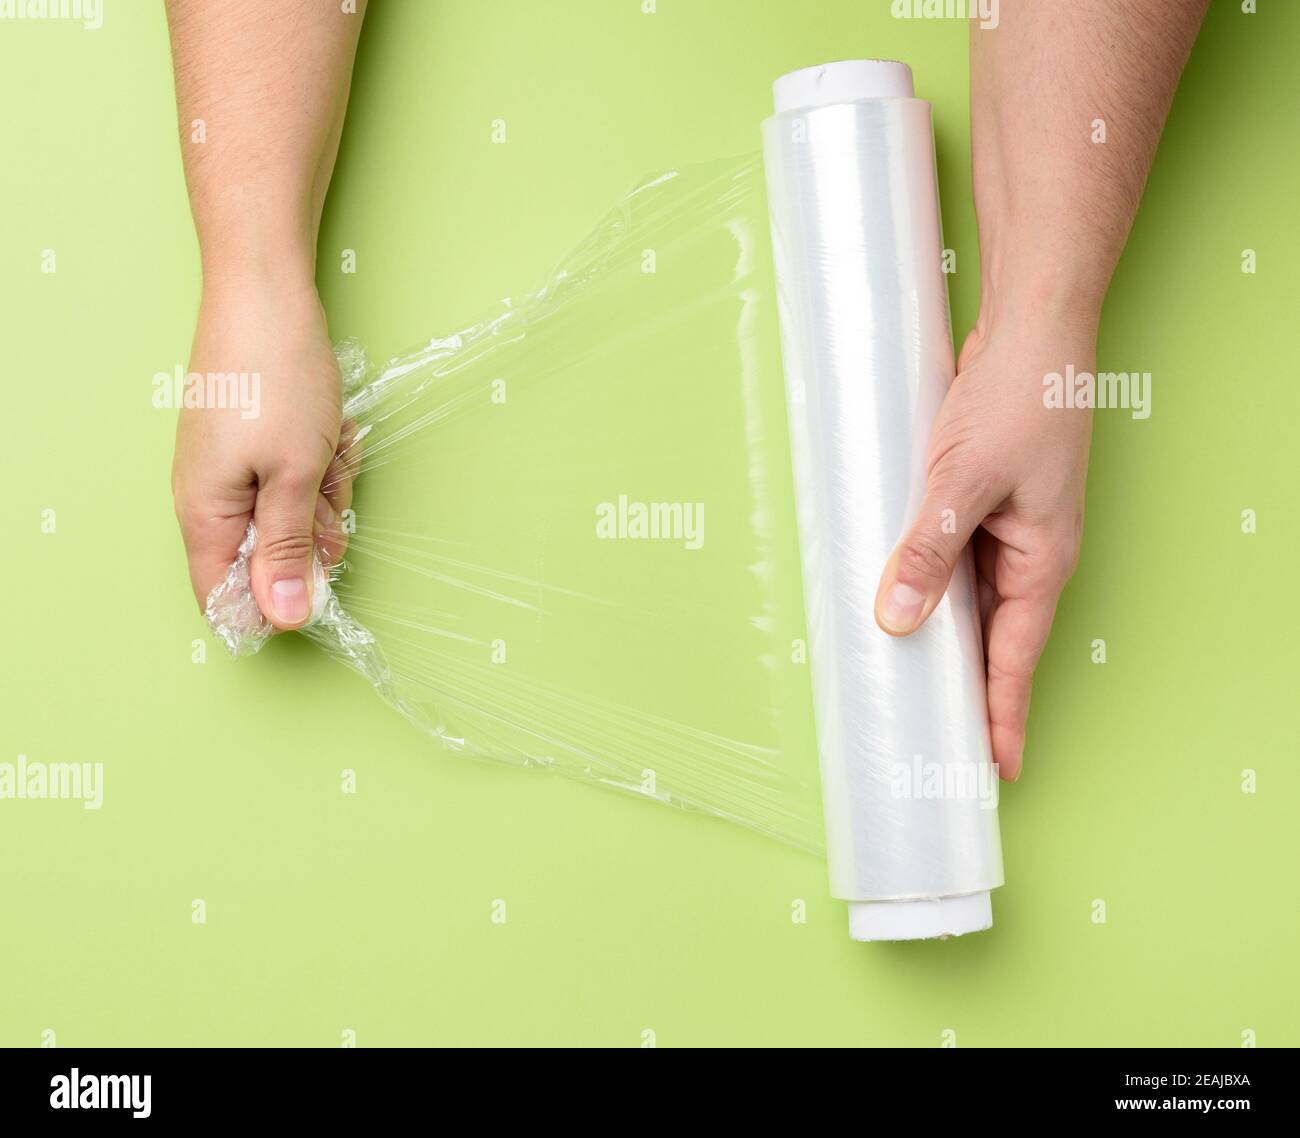 https://c8.alamy.com/comp/2EAJBXA/two-female-hands-hold-a-roll-of-transparent-cling-film-for-packaging-products-2EAJBXA.jpg